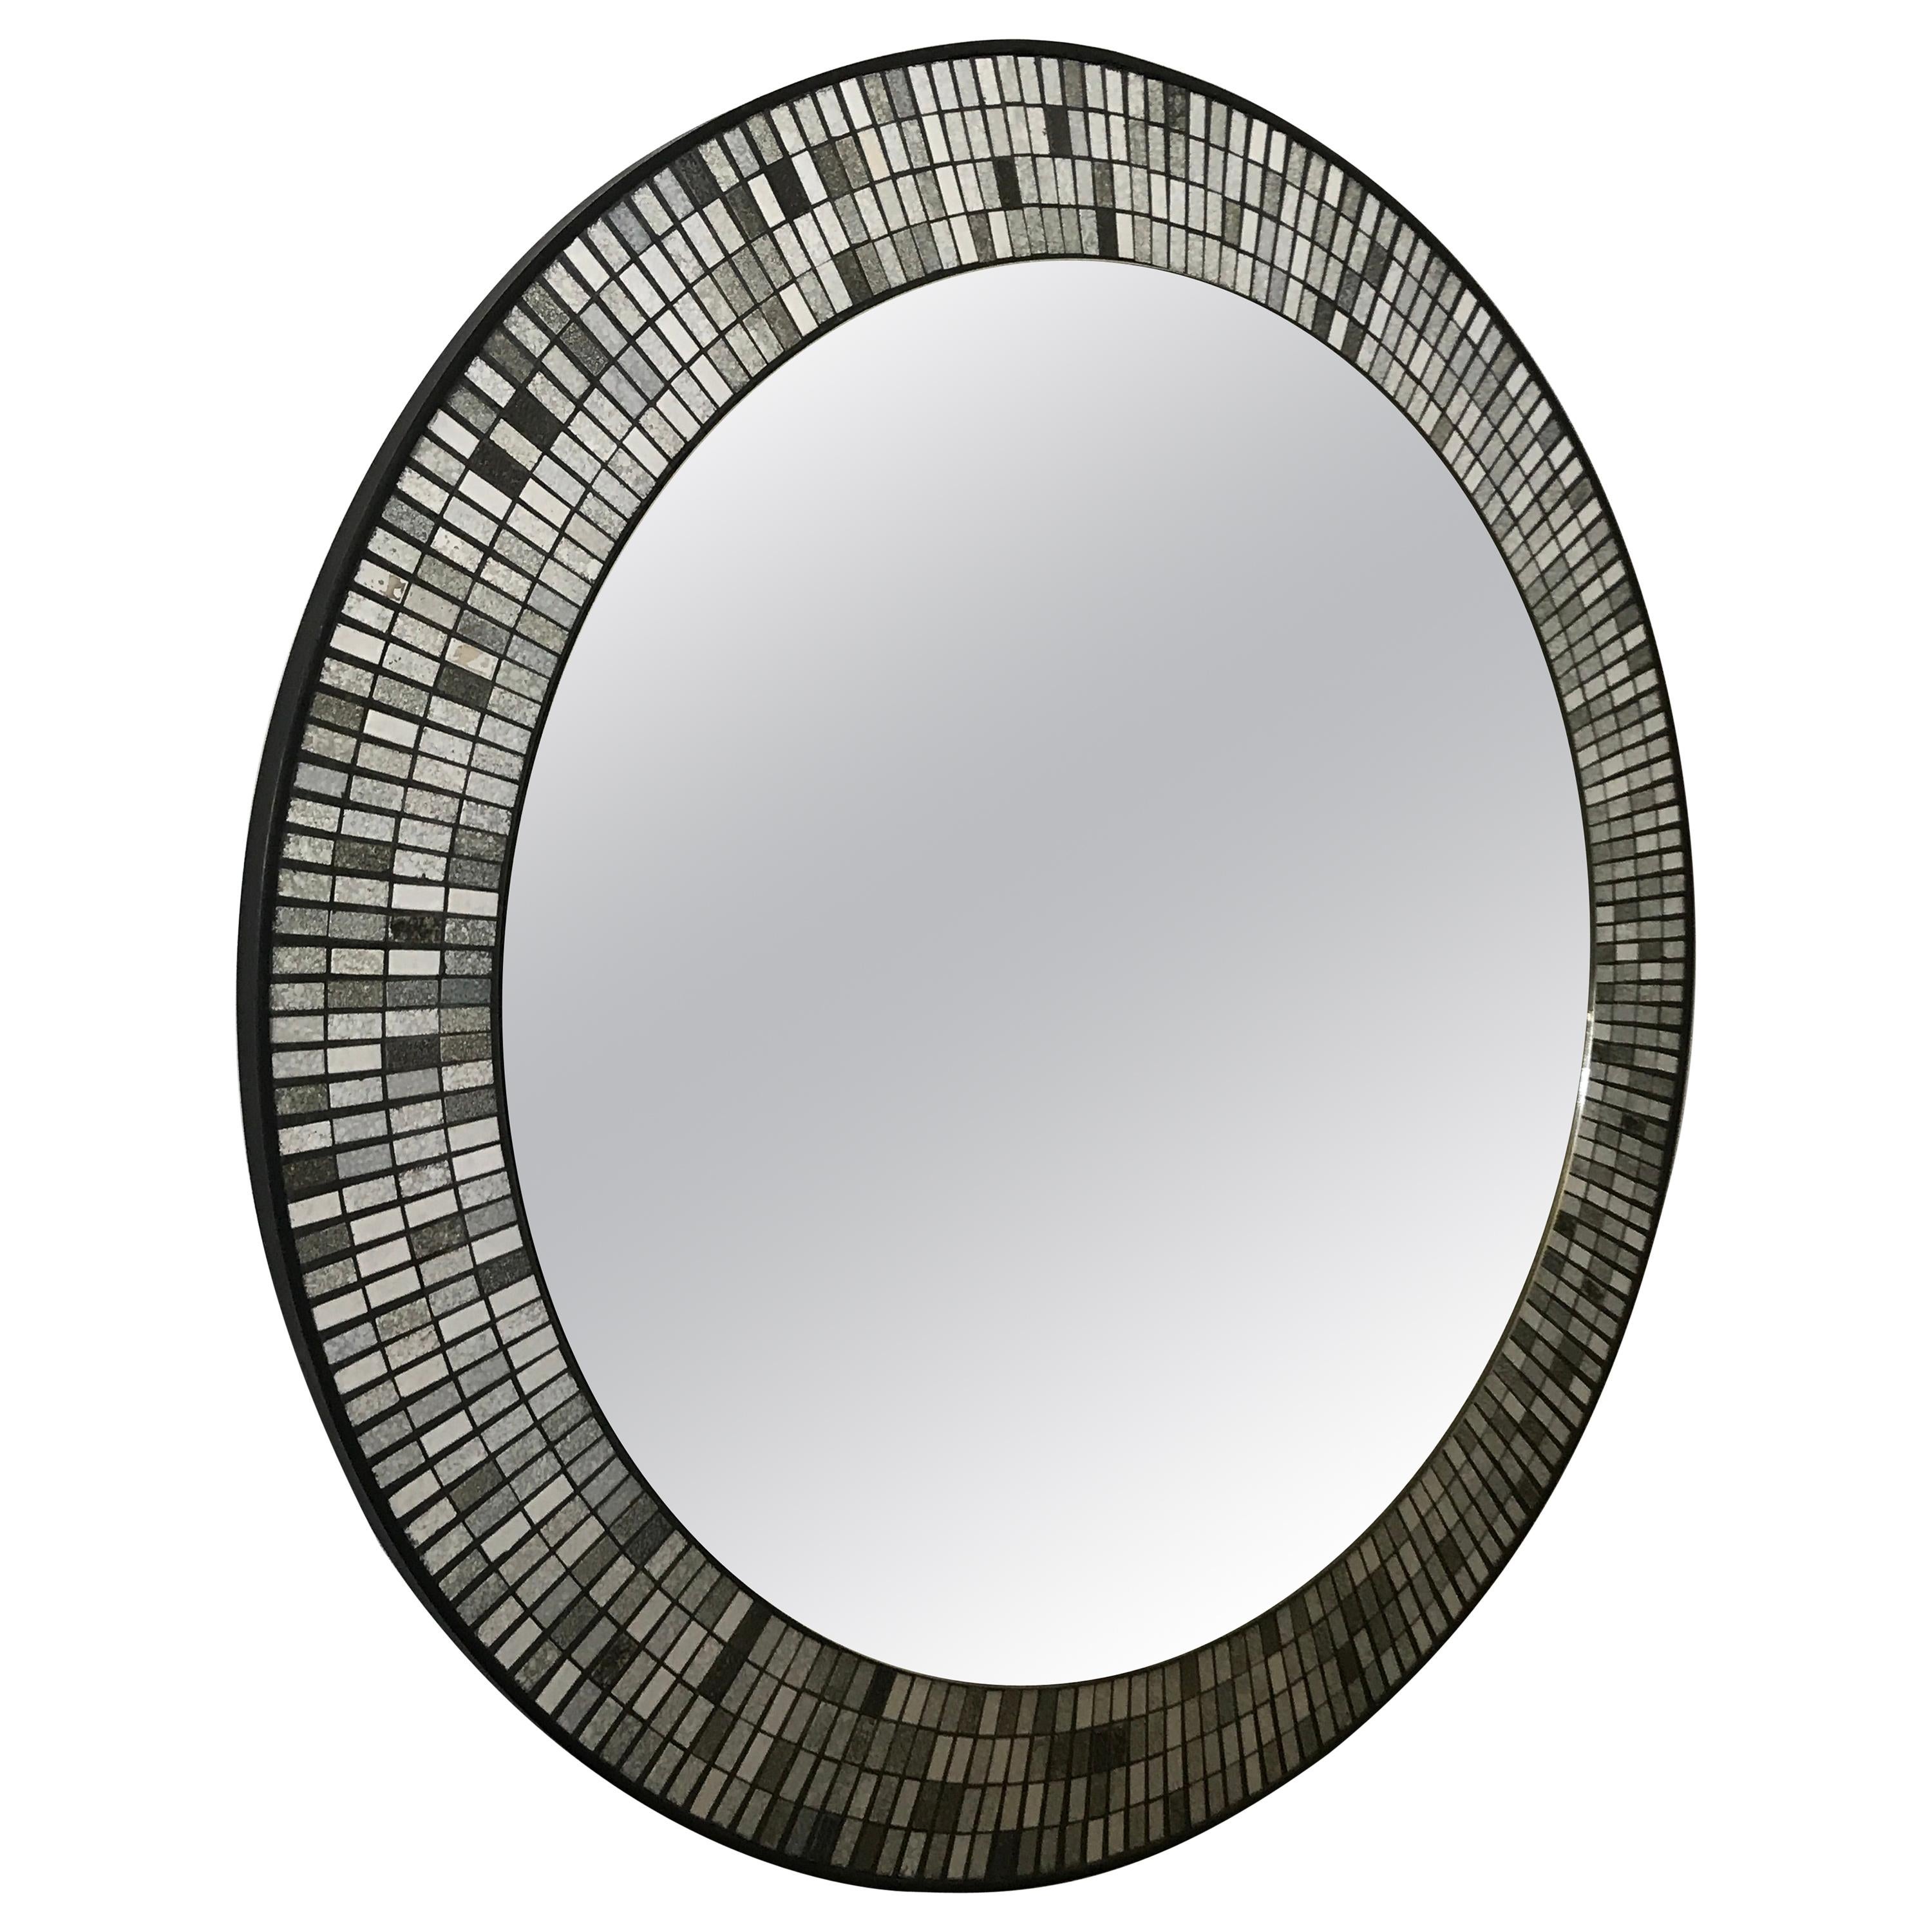 1950s German Round Mosaic Wall Mirror For Sale